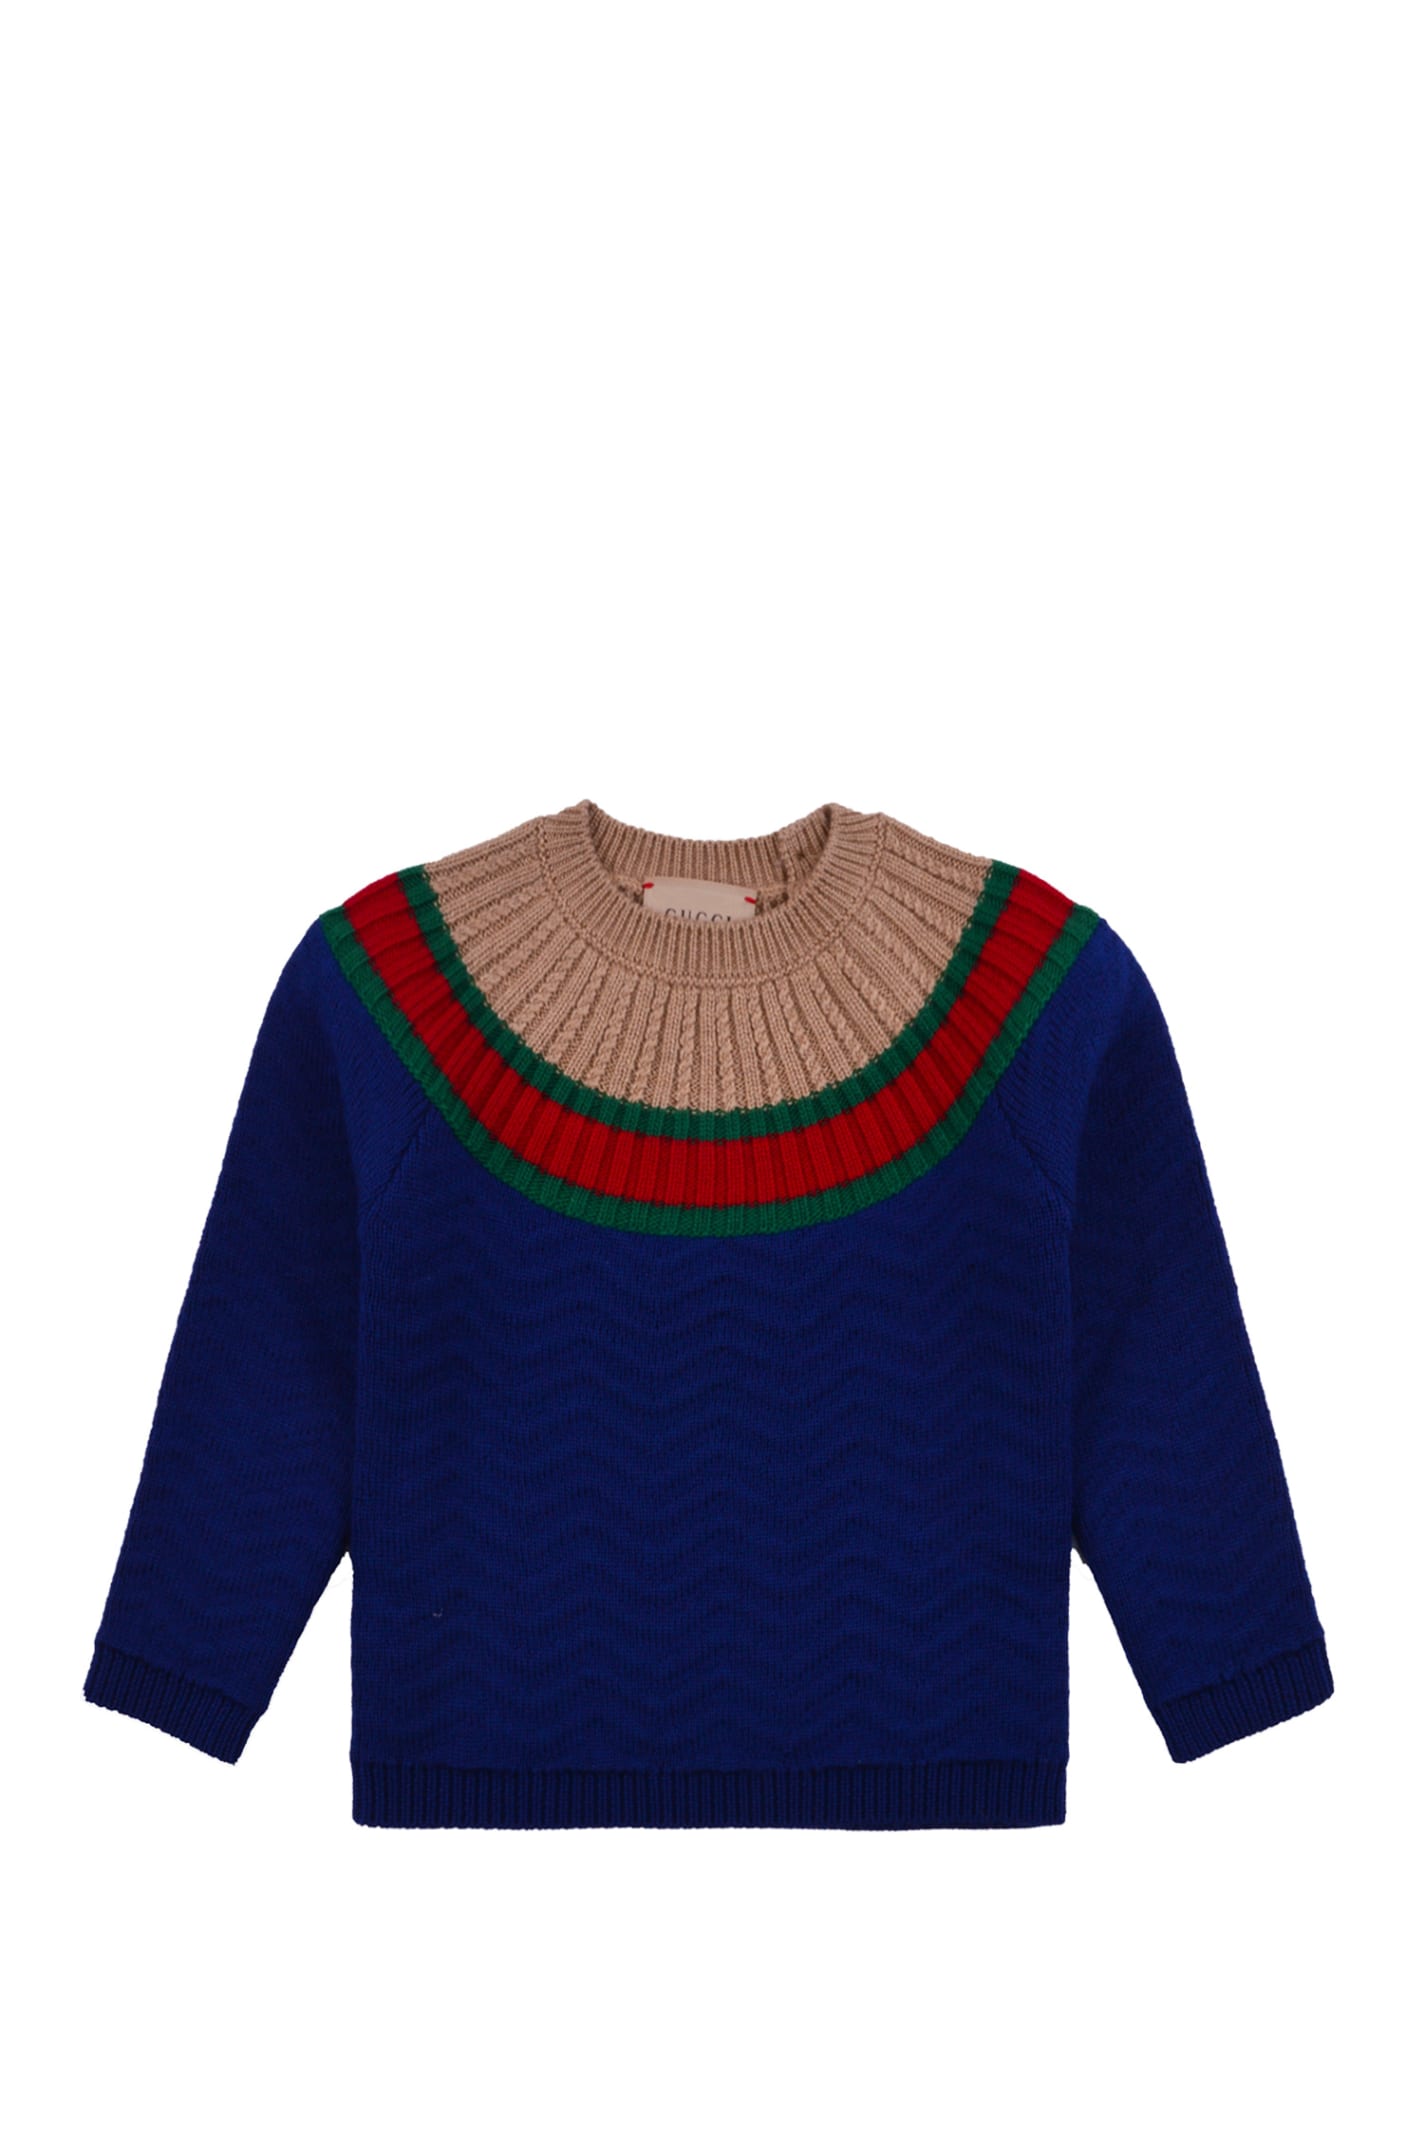 Gucci Kids' Wool Sweater With Web Detail In Multicolor